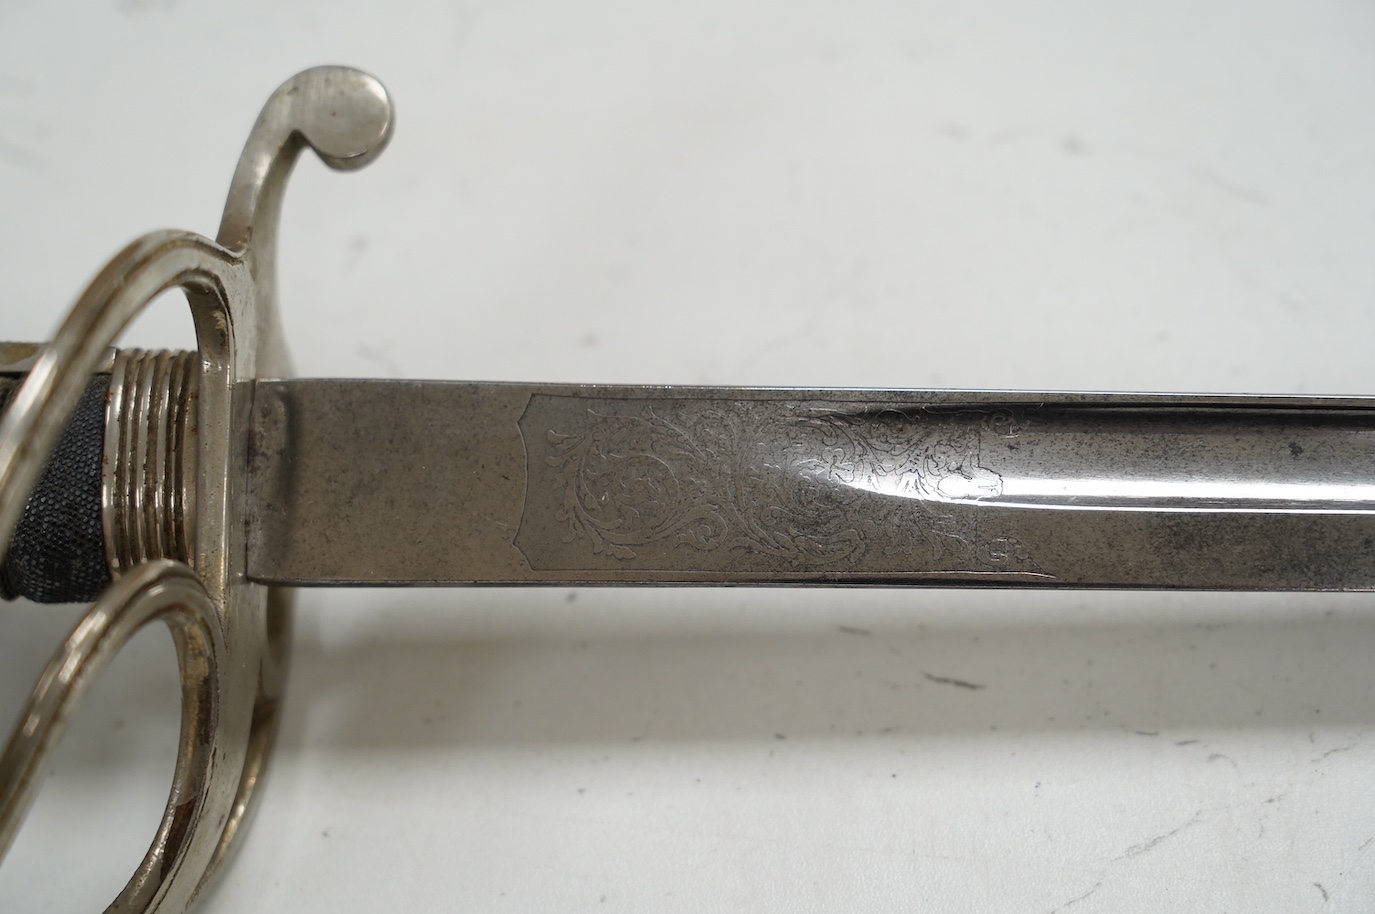 A George VI Royal Artillery officer’s sword, regulation etched blade and plated triple bar guard, blade 85.5cm. Condition - good